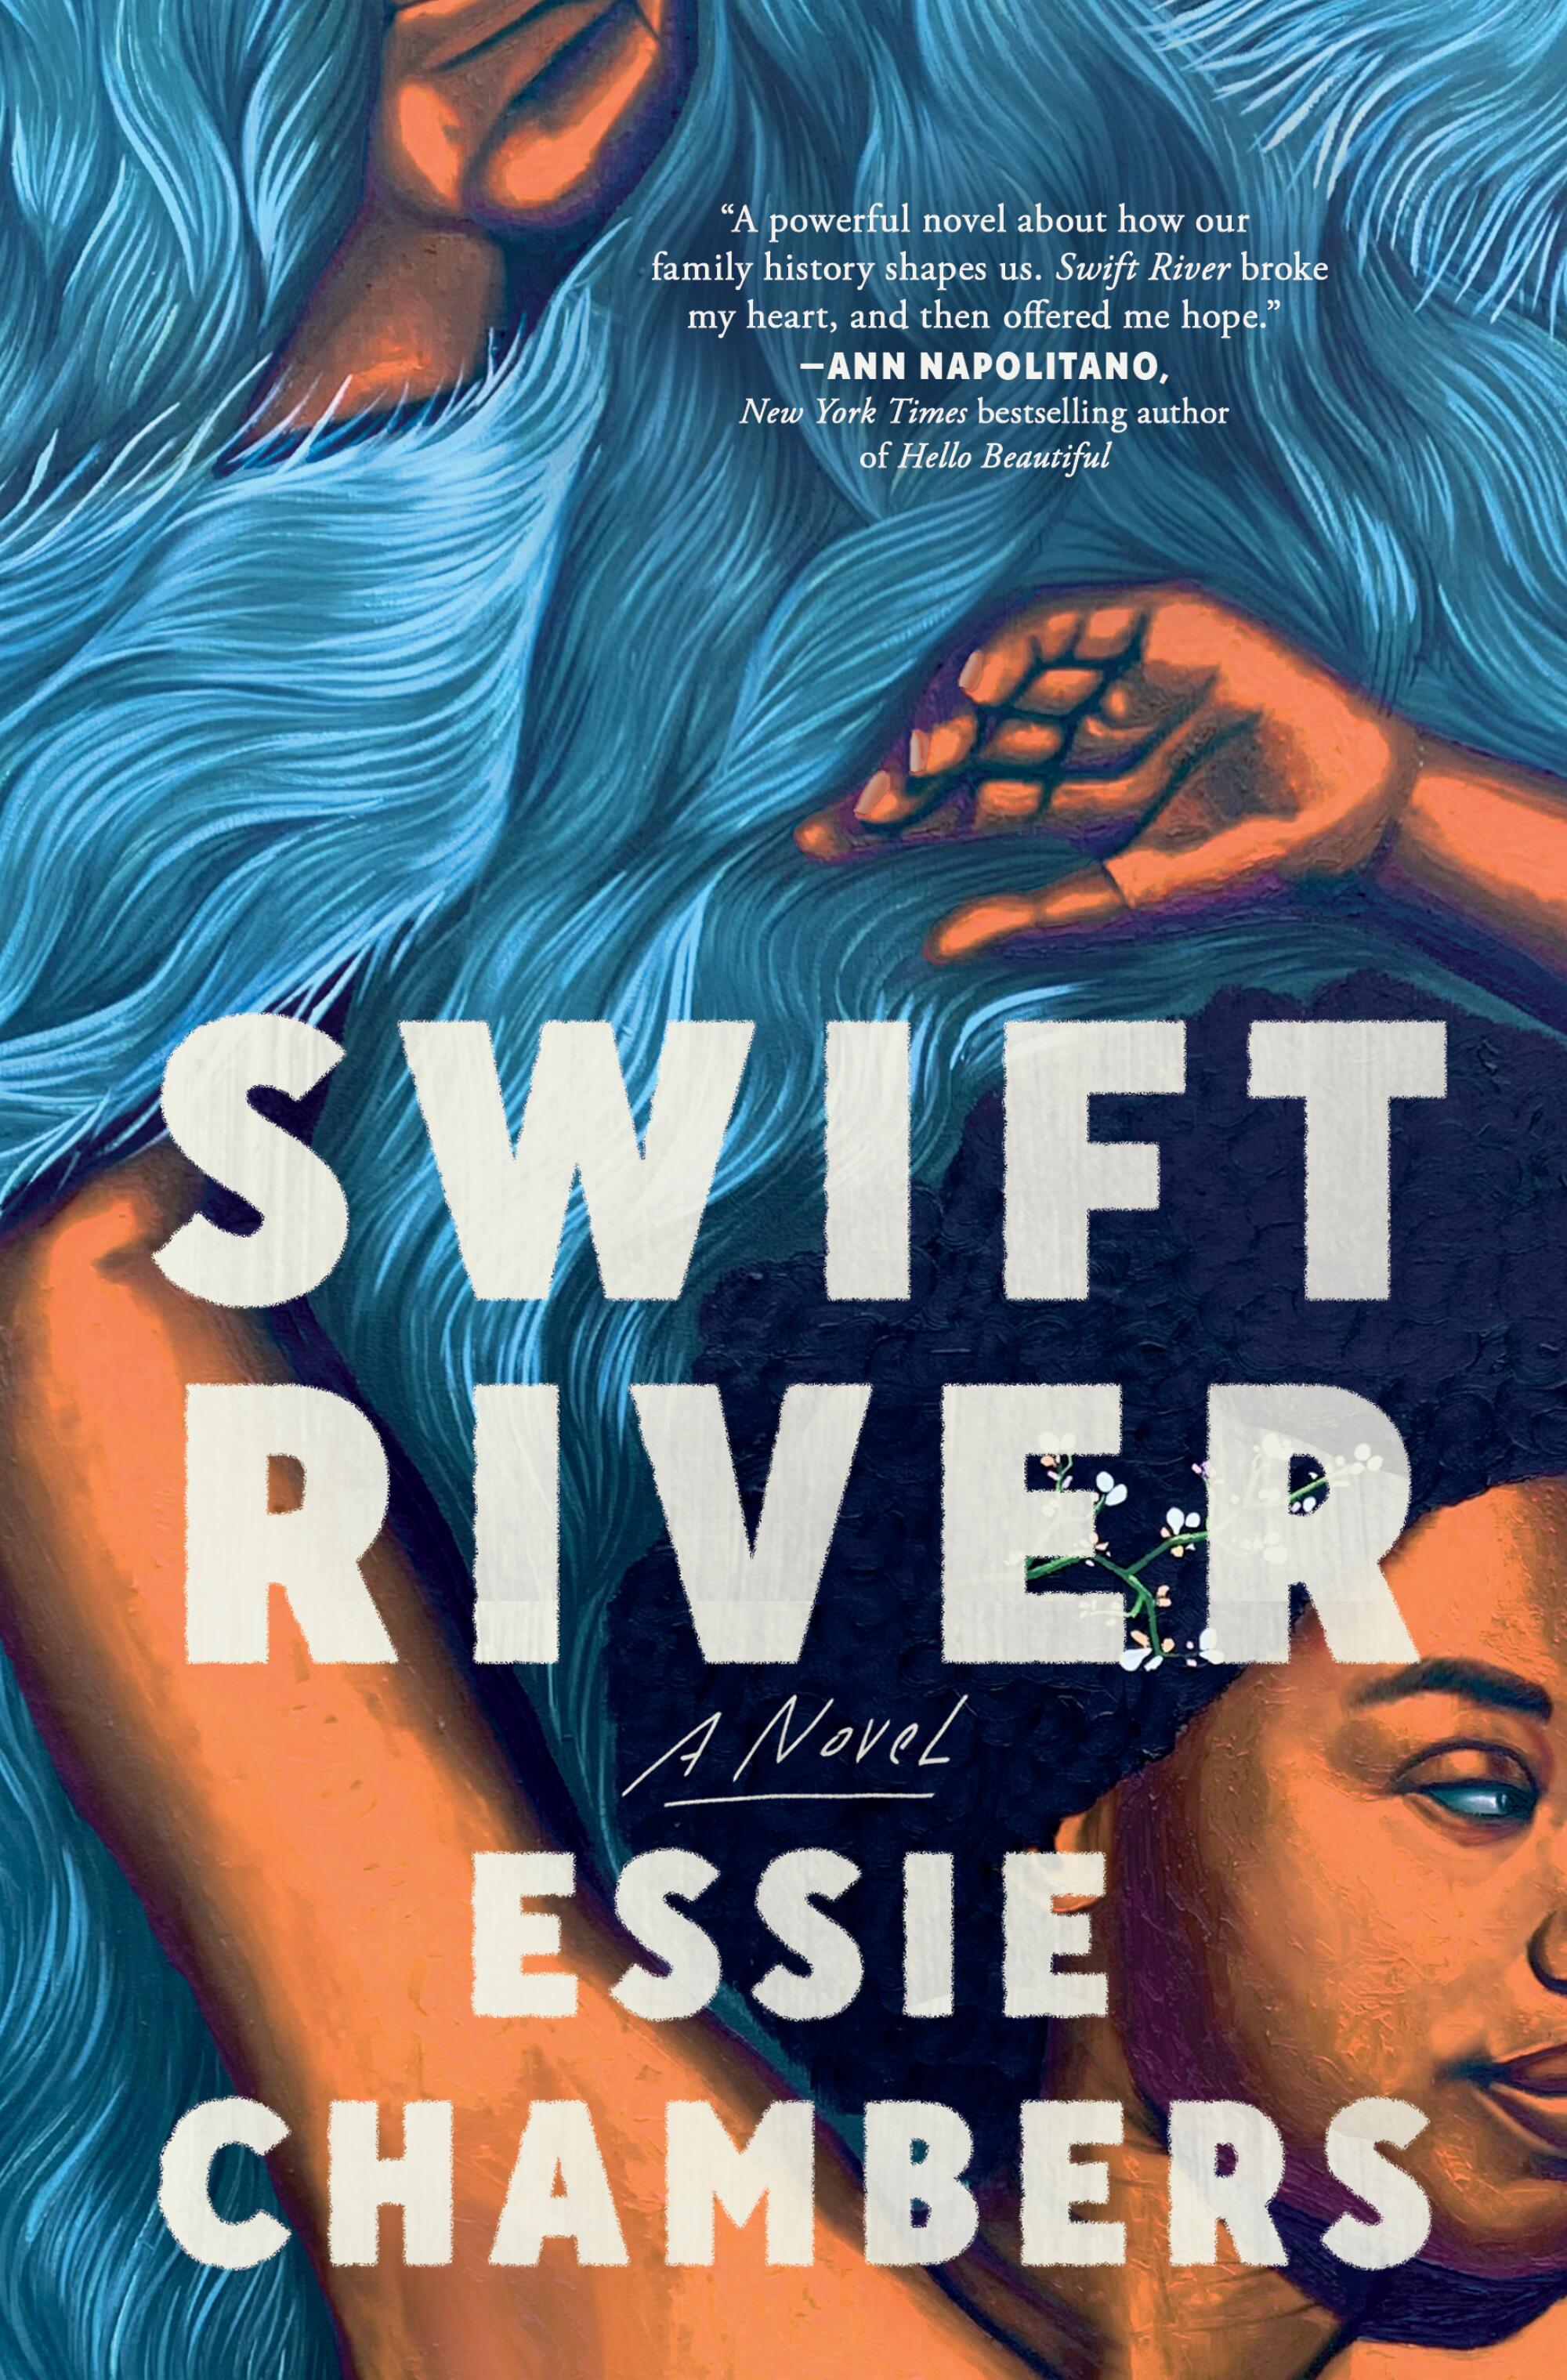 "Swift River" by Essie Chambers